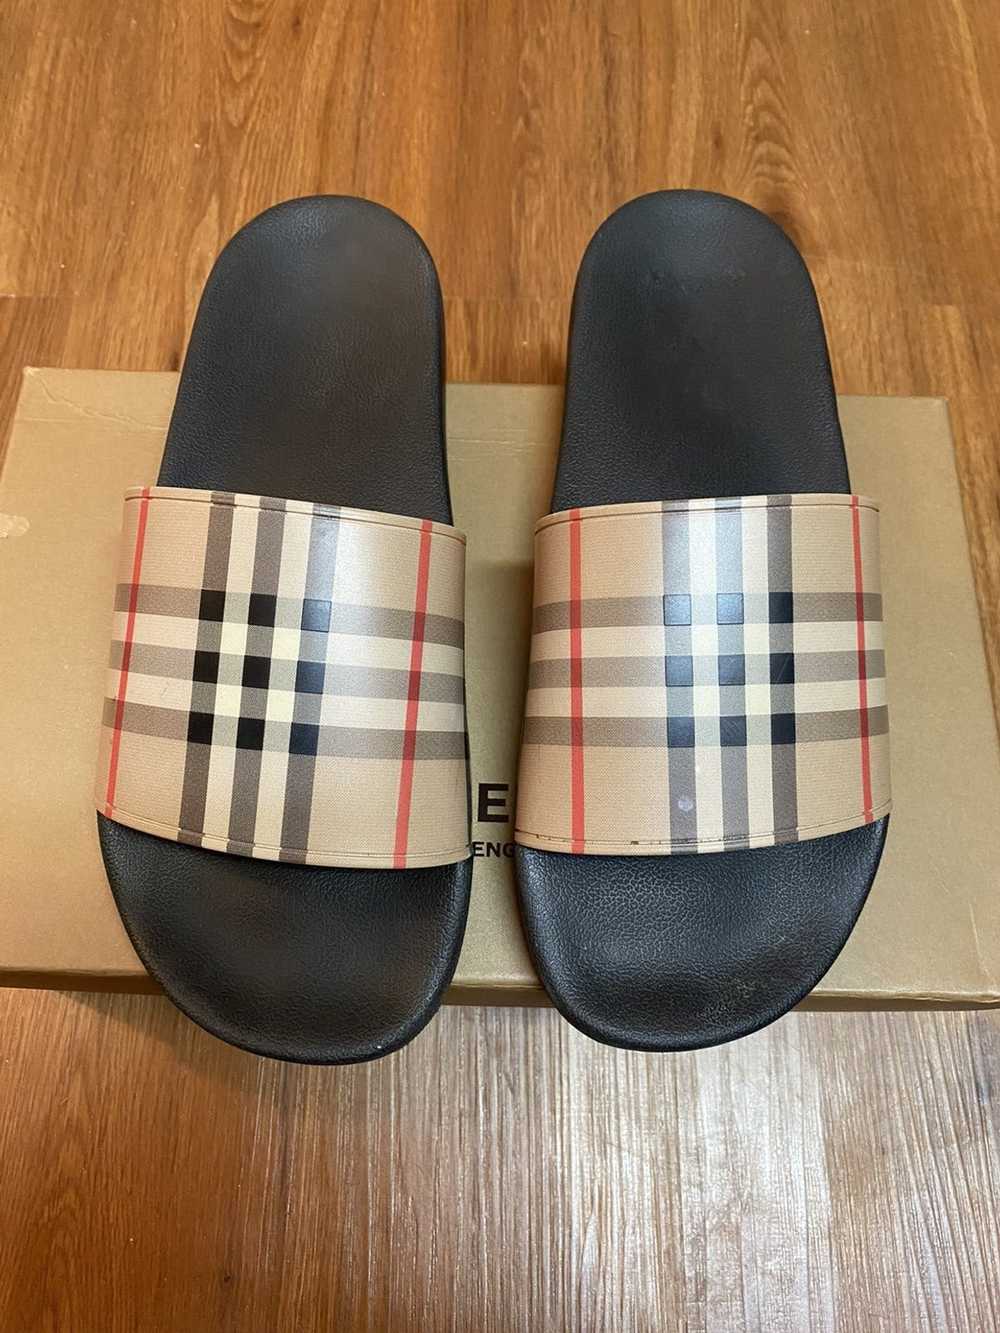 Burberry Burberry Furley Check Pool slides size 12 - image 2